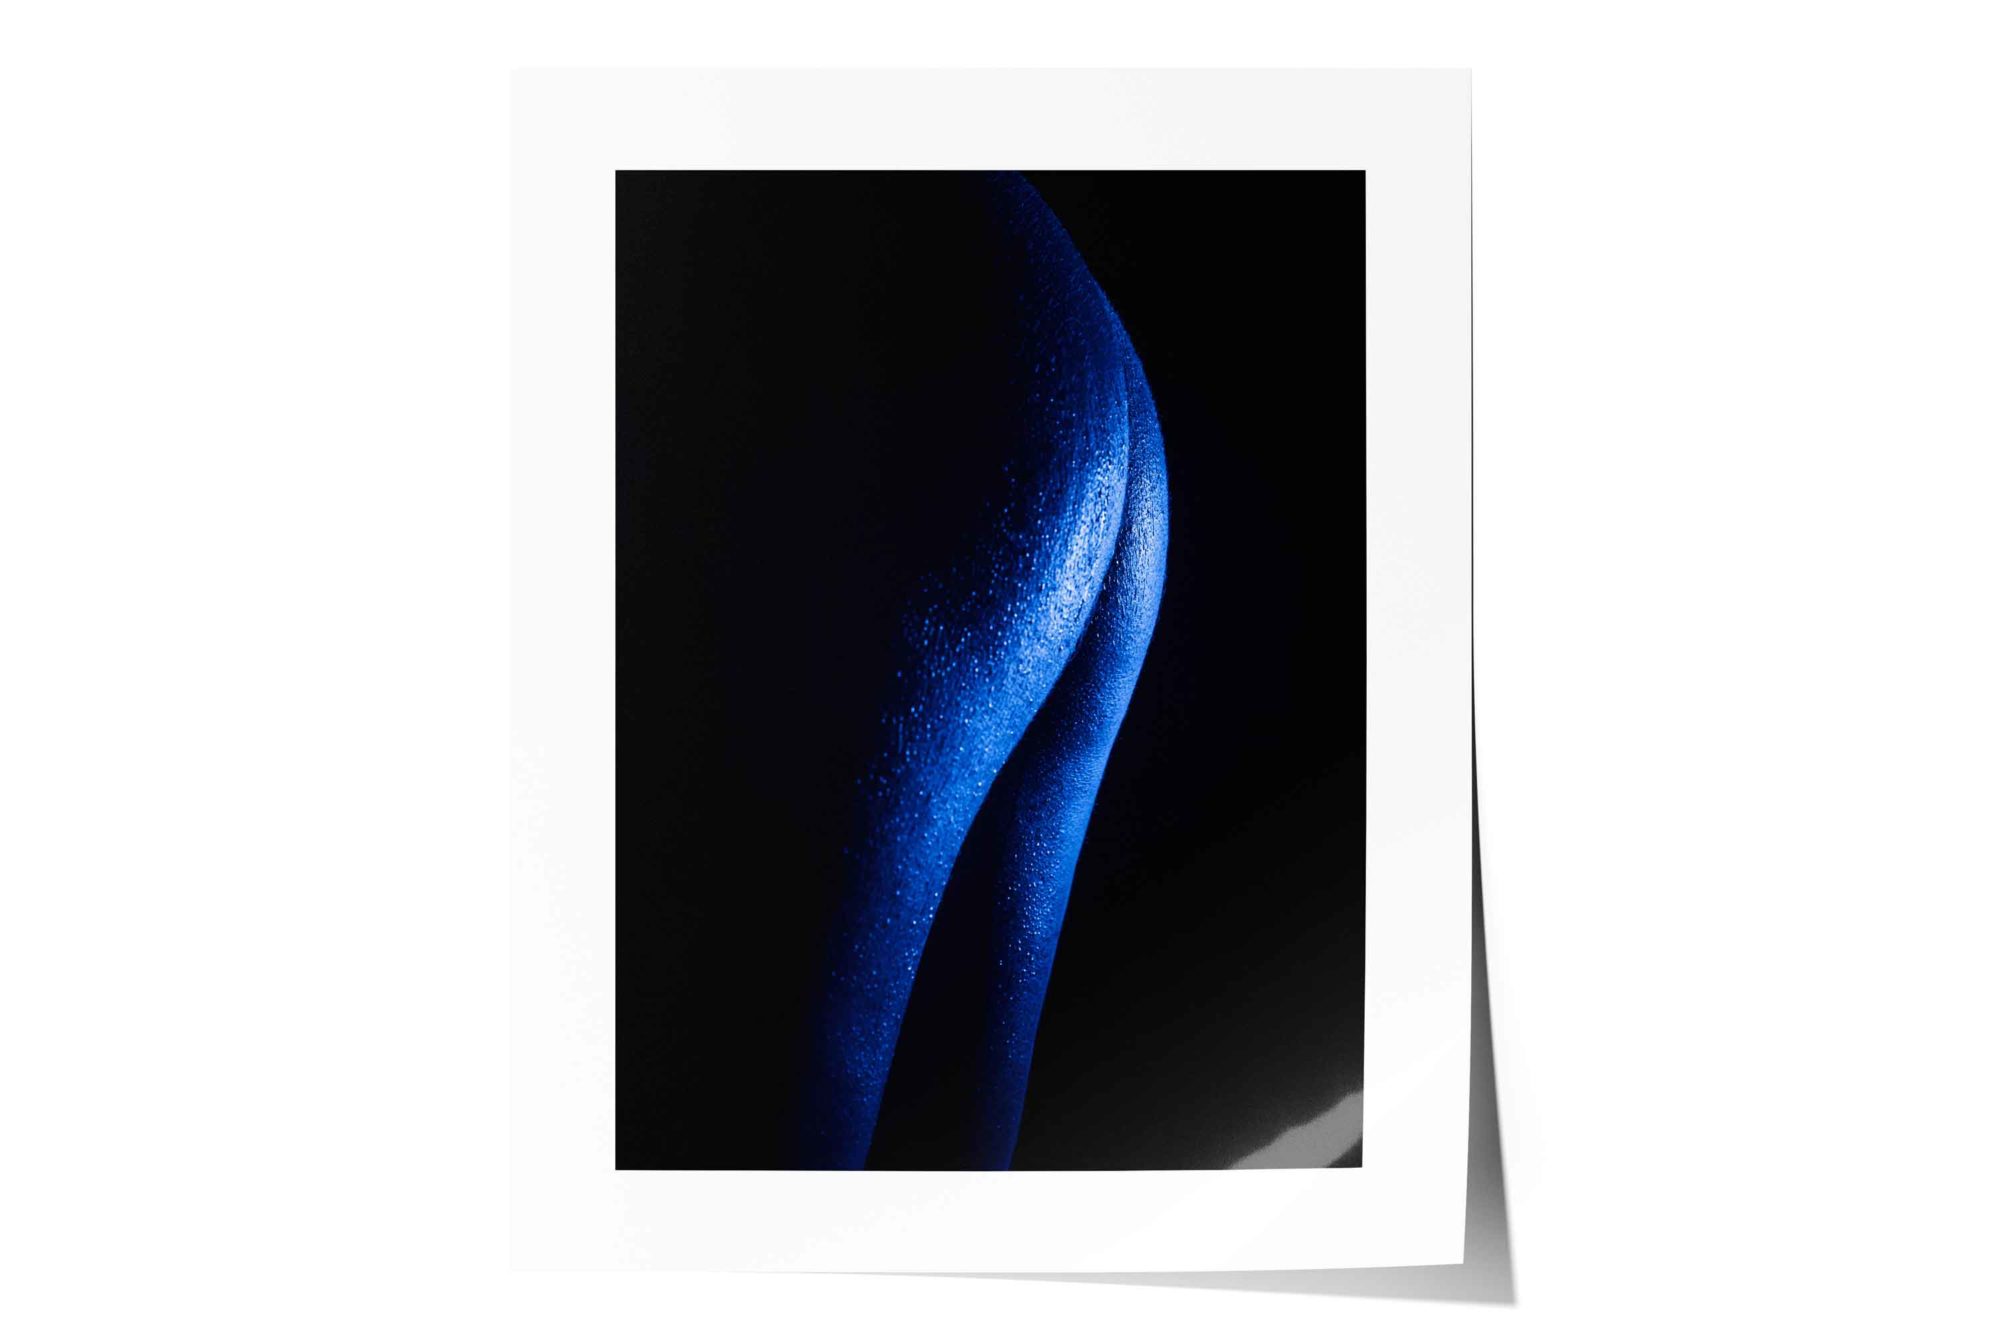 Nude Art Limited Edition Print